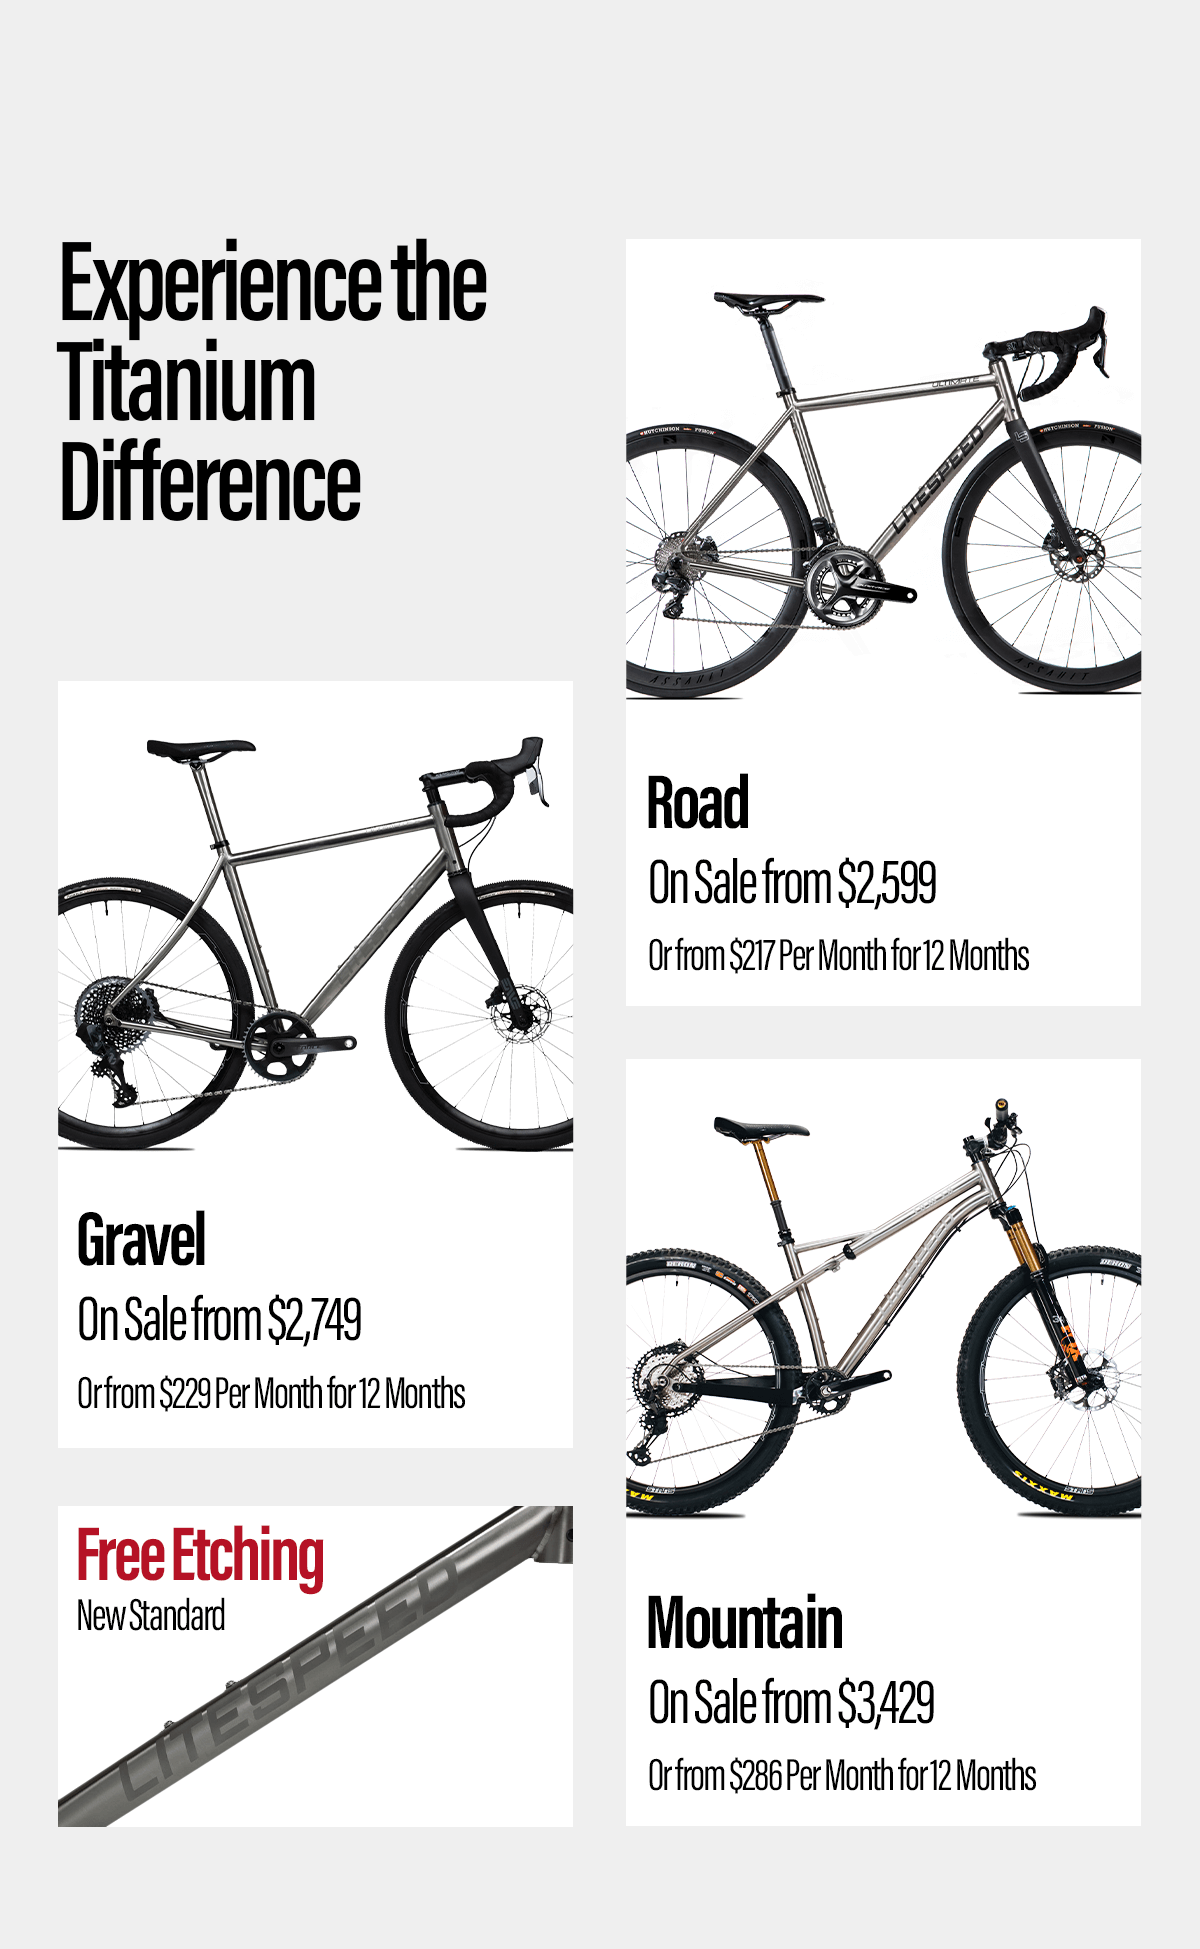 Experience the titanium difference. Shop all Litespeed bikes on sale now: gravel bikes from $2,749, road bikes from $2,599 and mountain bikes from $3,429.